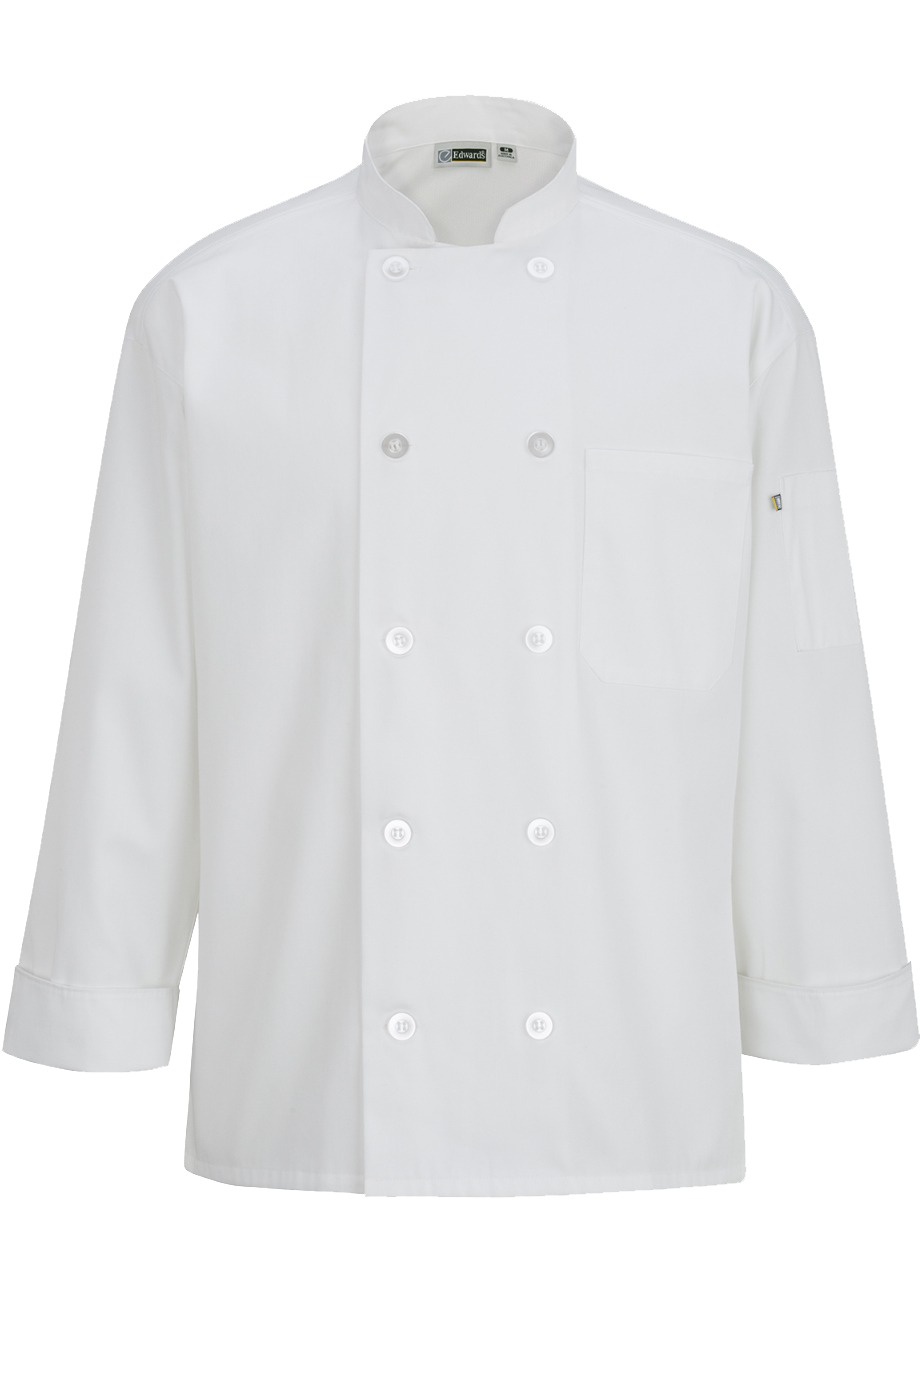 'Edwards 3363 10 Button Chef Coat With Mesh'